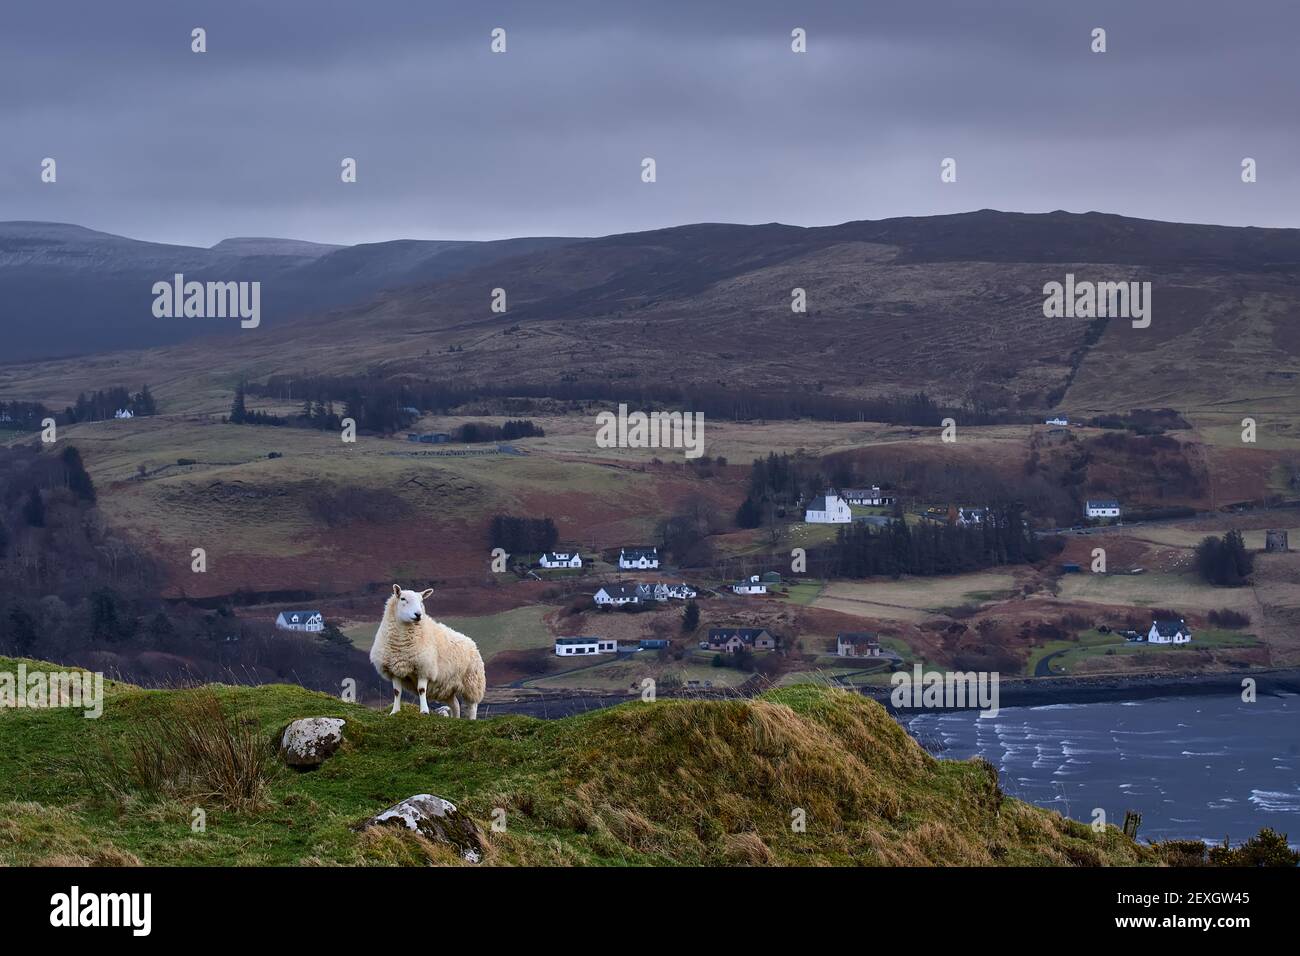 lamb or sheep on grassy cliffs of the Isle of Skye. Scottish Highlands. near rural houses and the coast. Stock Photo